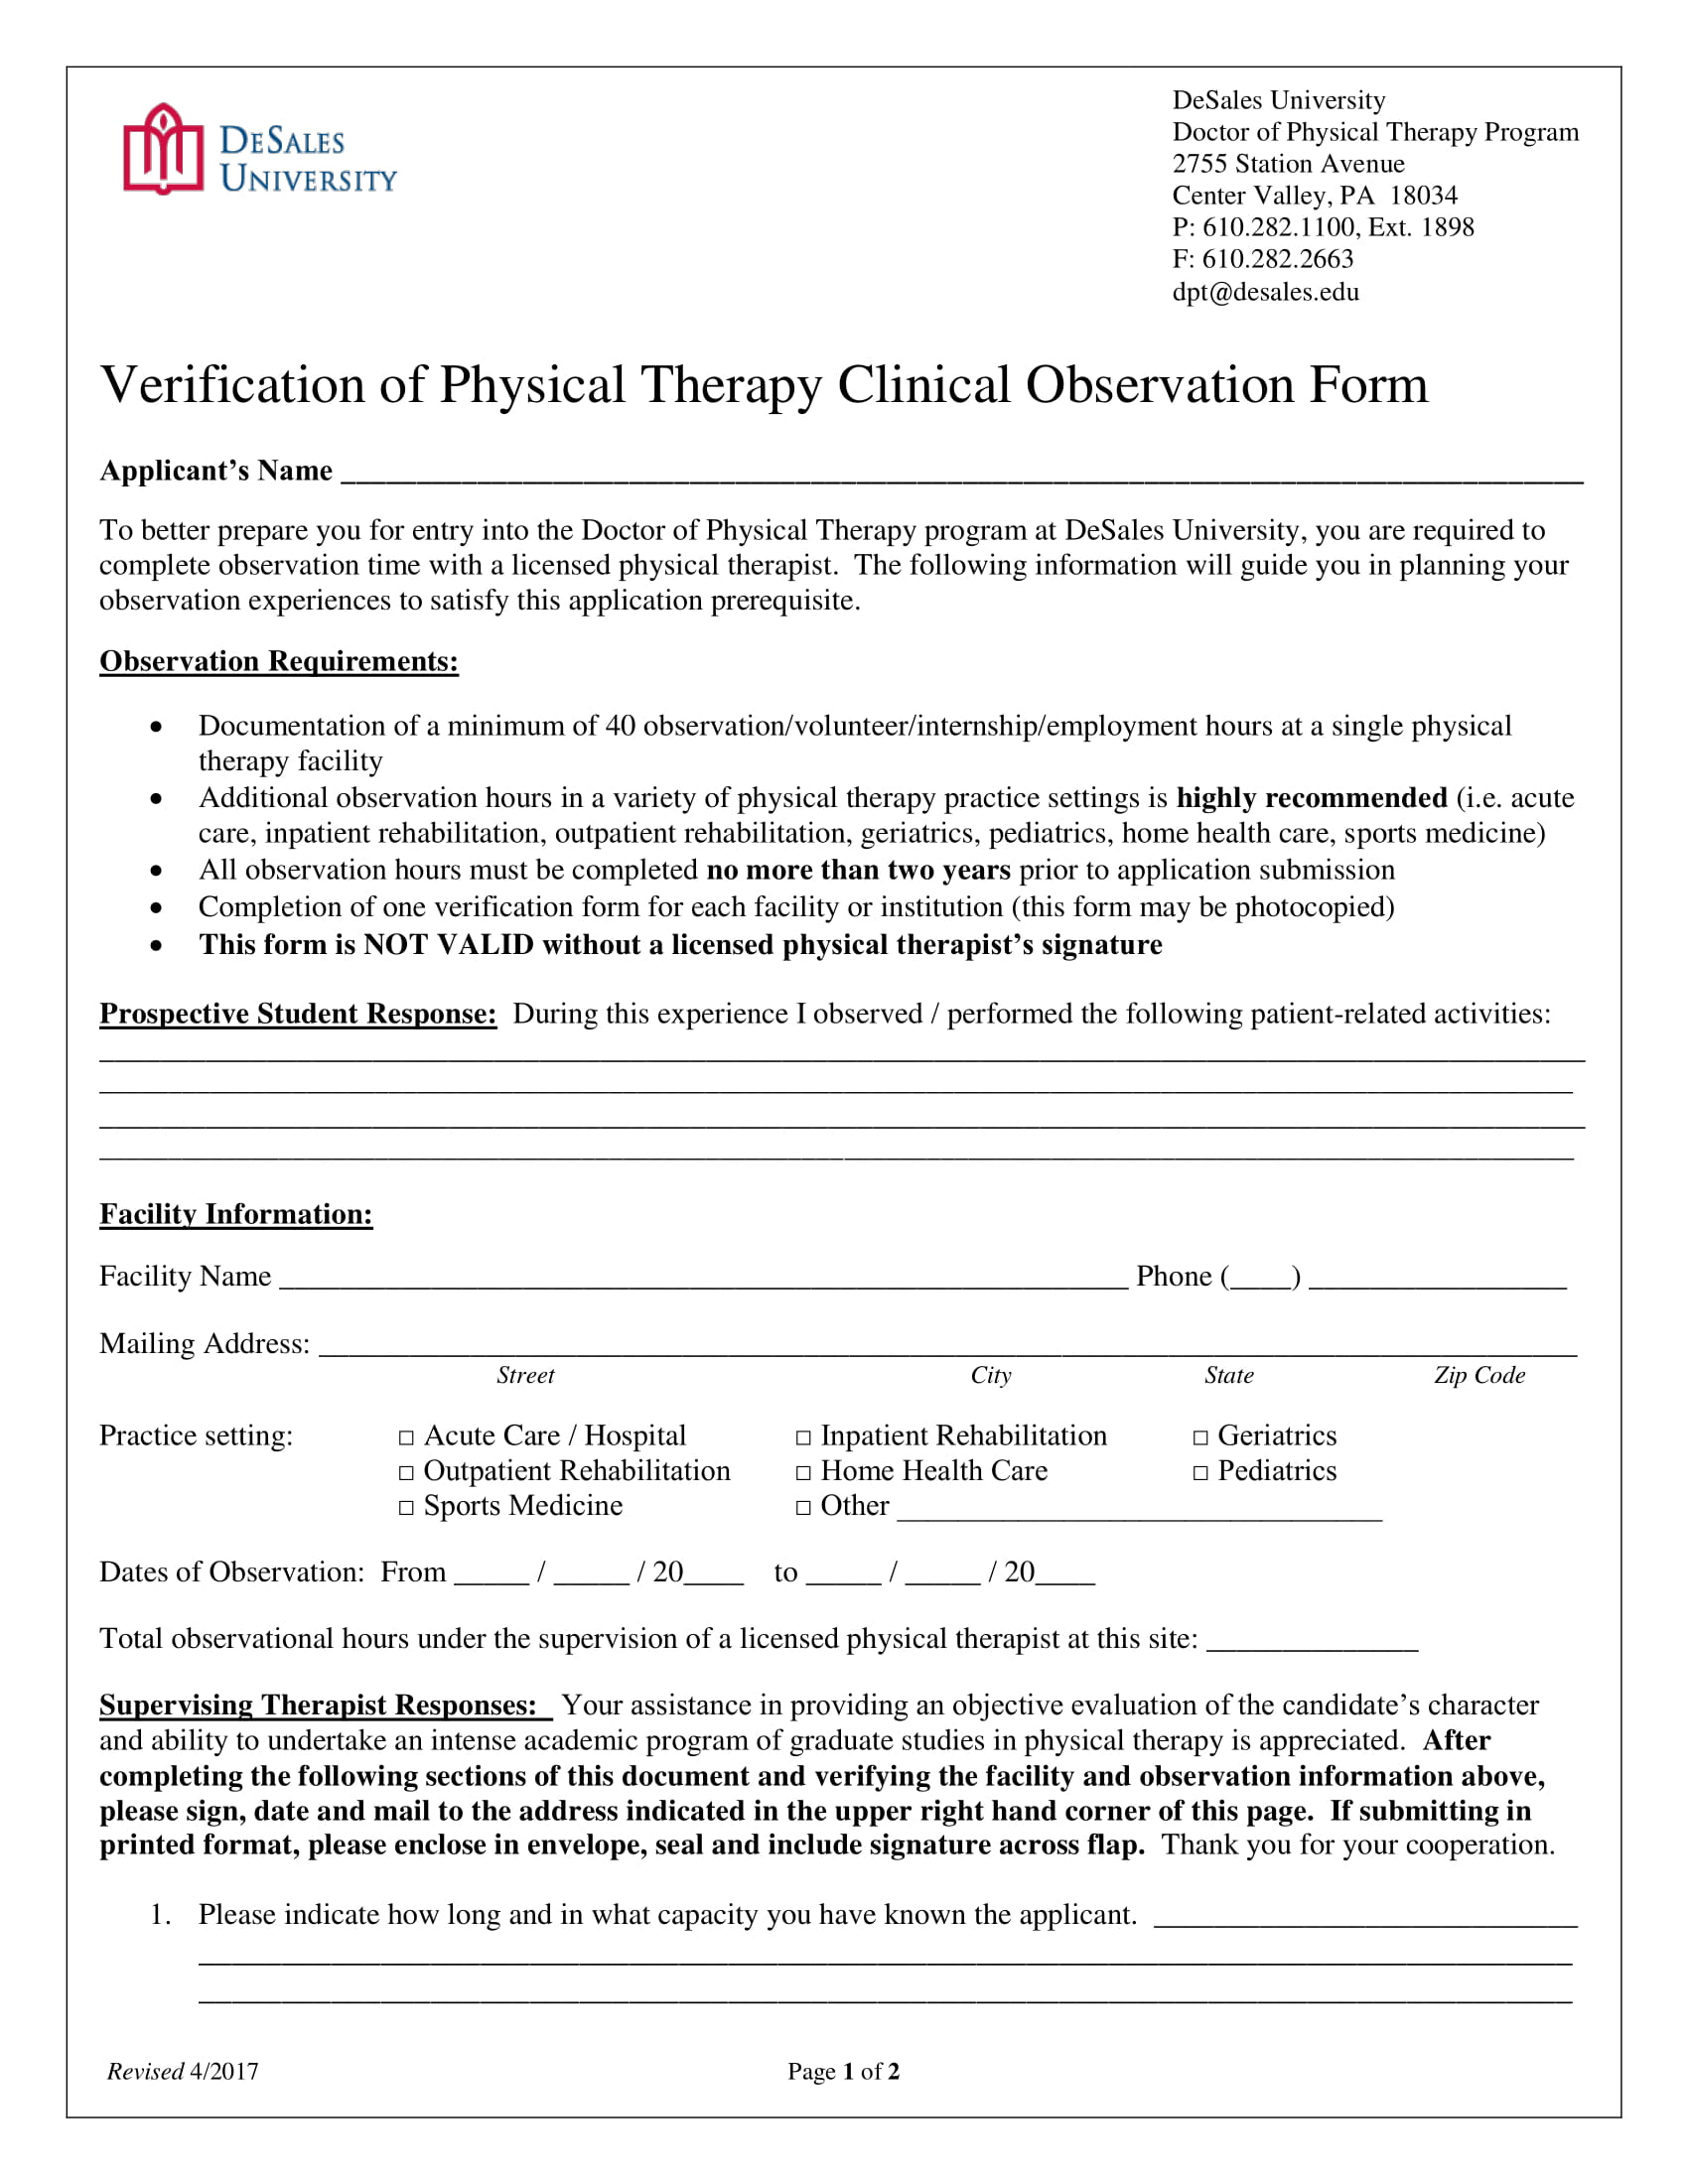 physical therapy clinical observation verification form 1